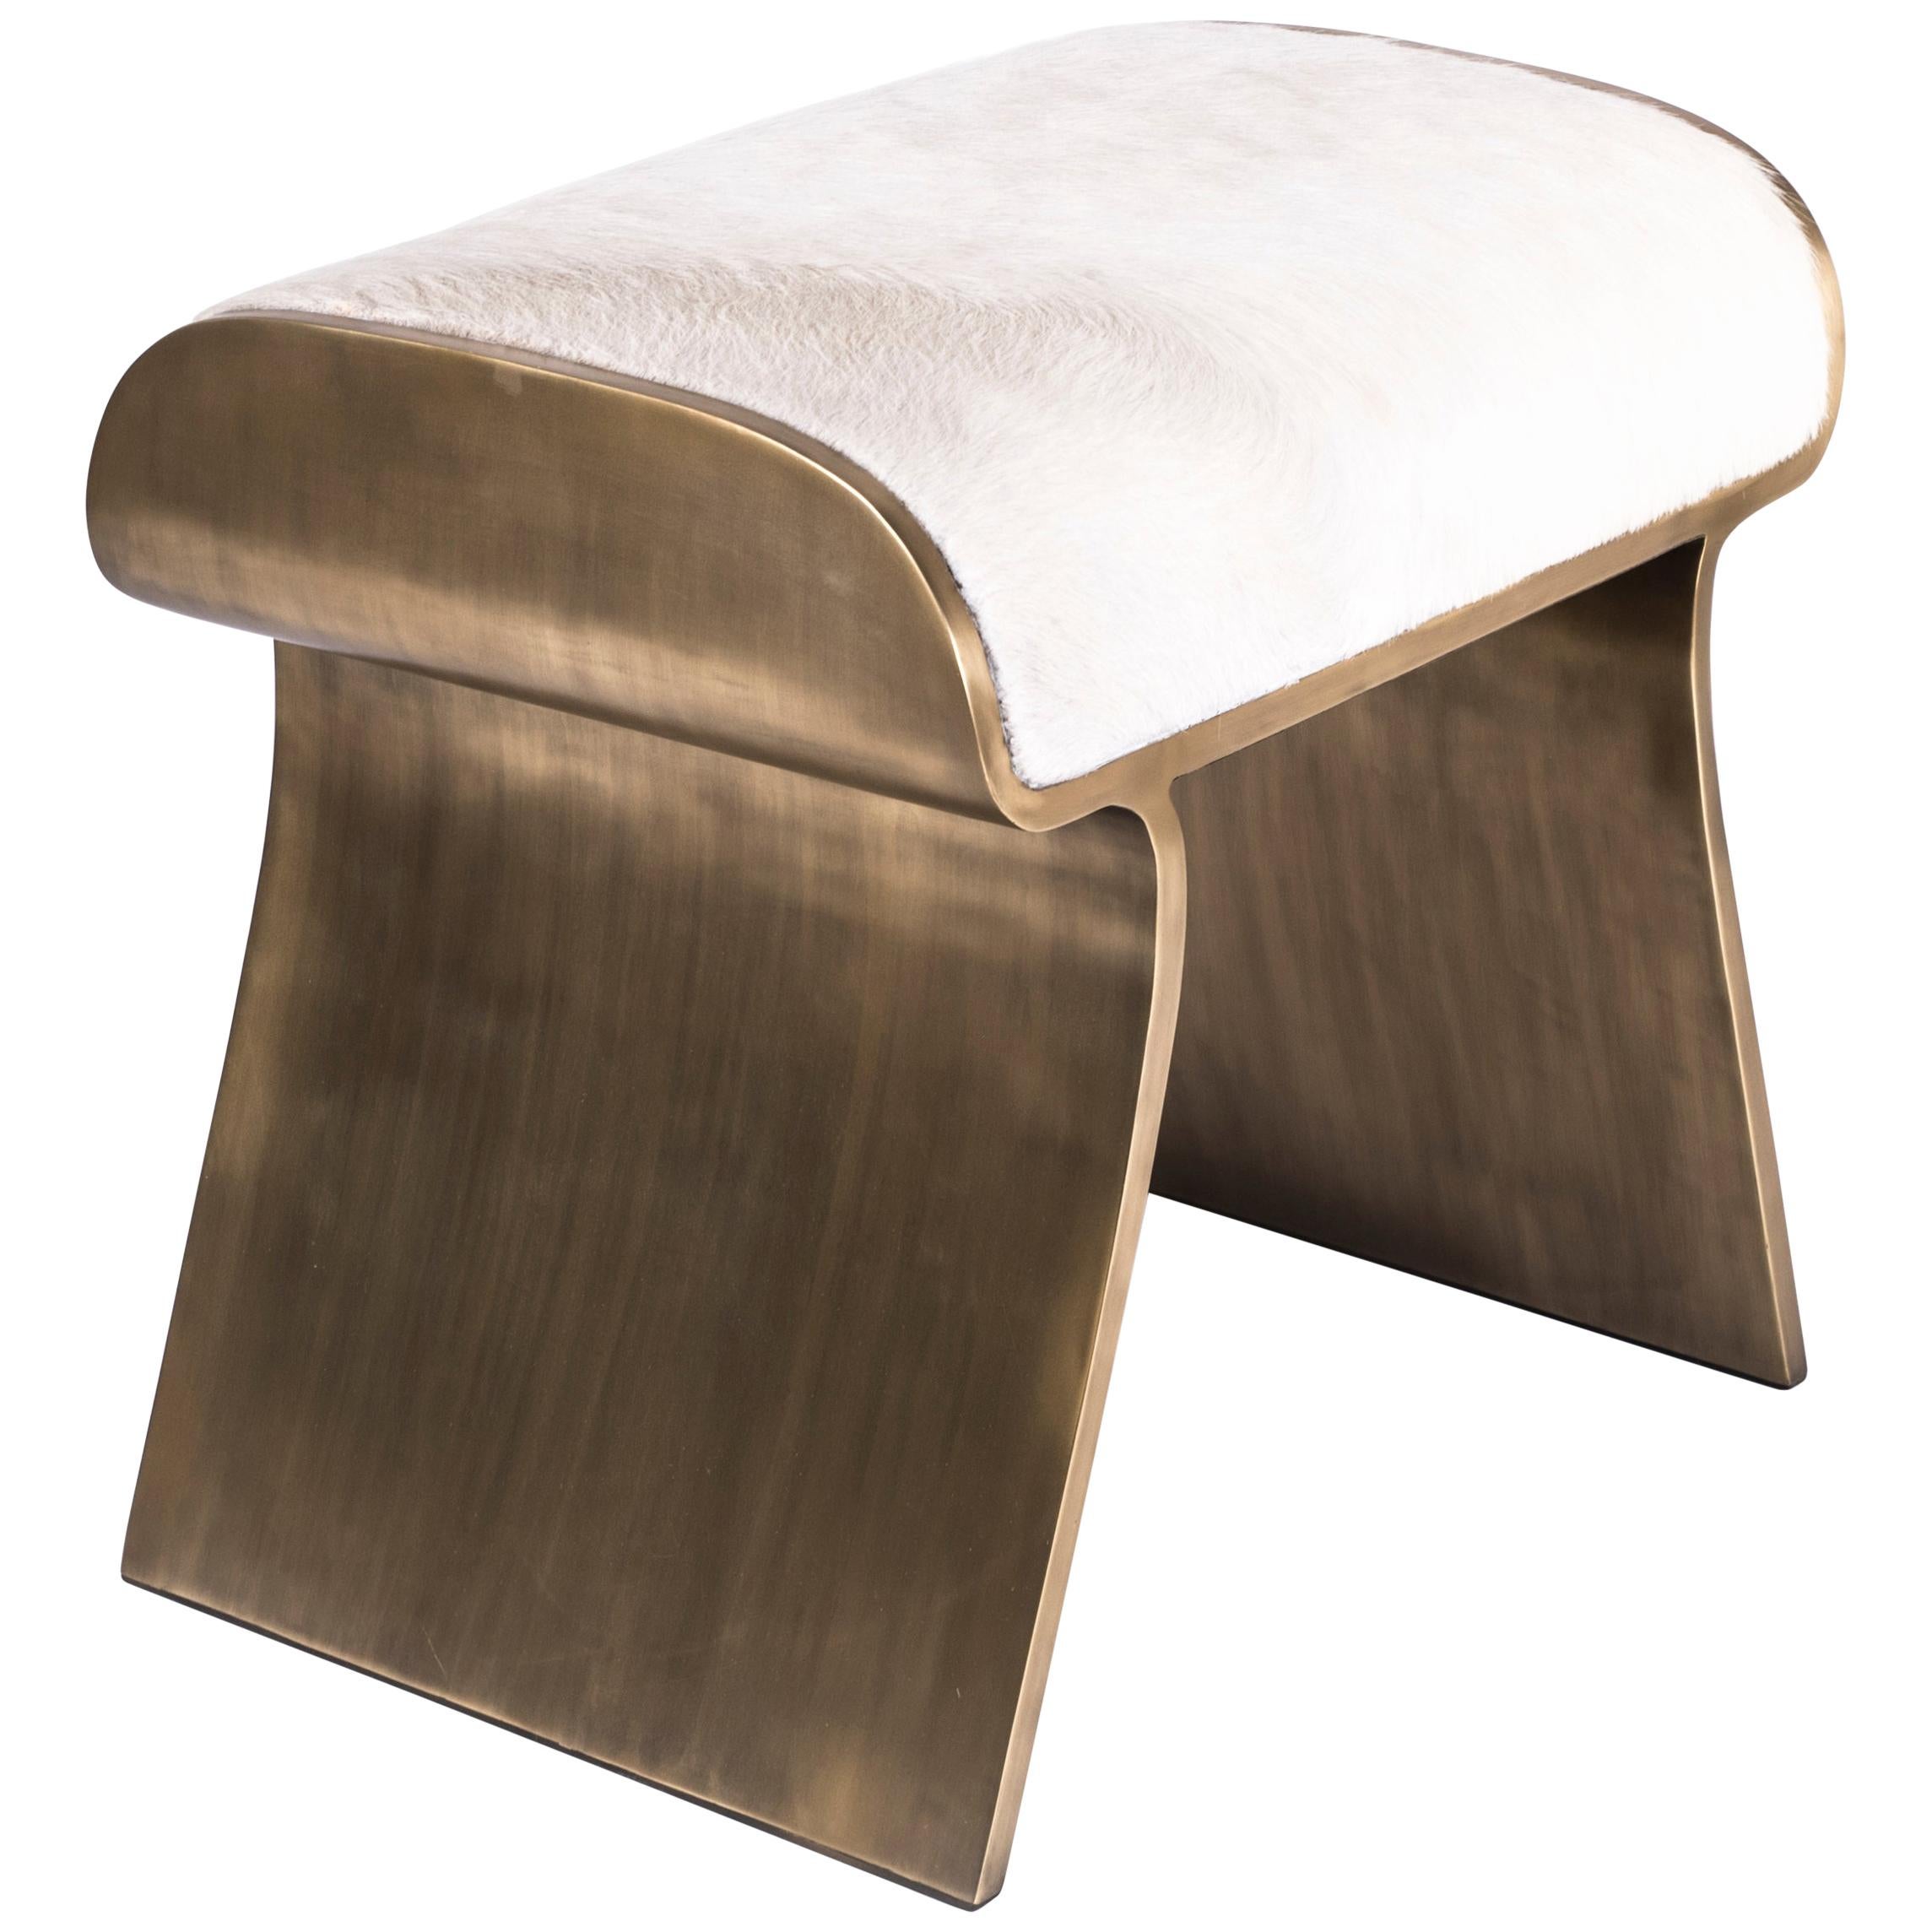 Contemporary Dandy Side Table in Cream Shagreen and Bronze-Patina Brass by Kifu, Paris For Sale